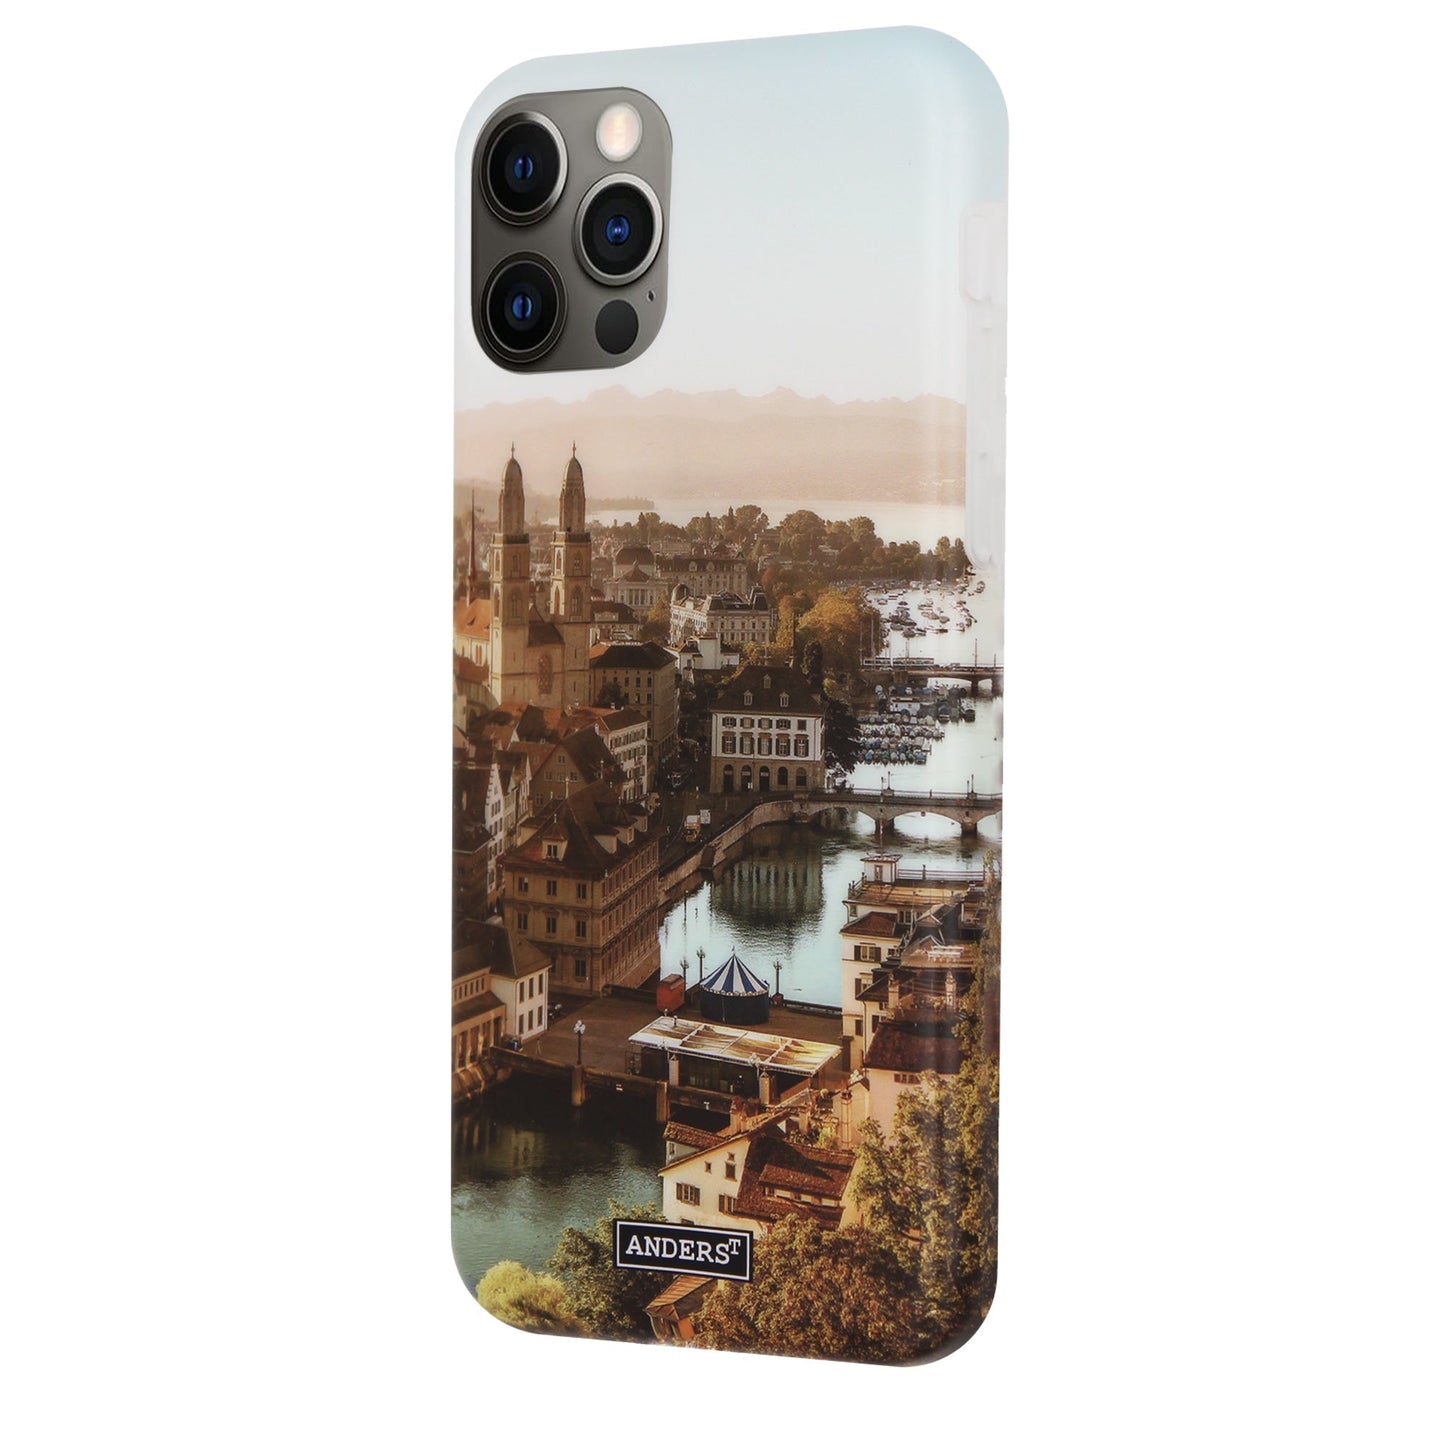 Zurich City from Above 360° Case for iPhone 12 Pro Max